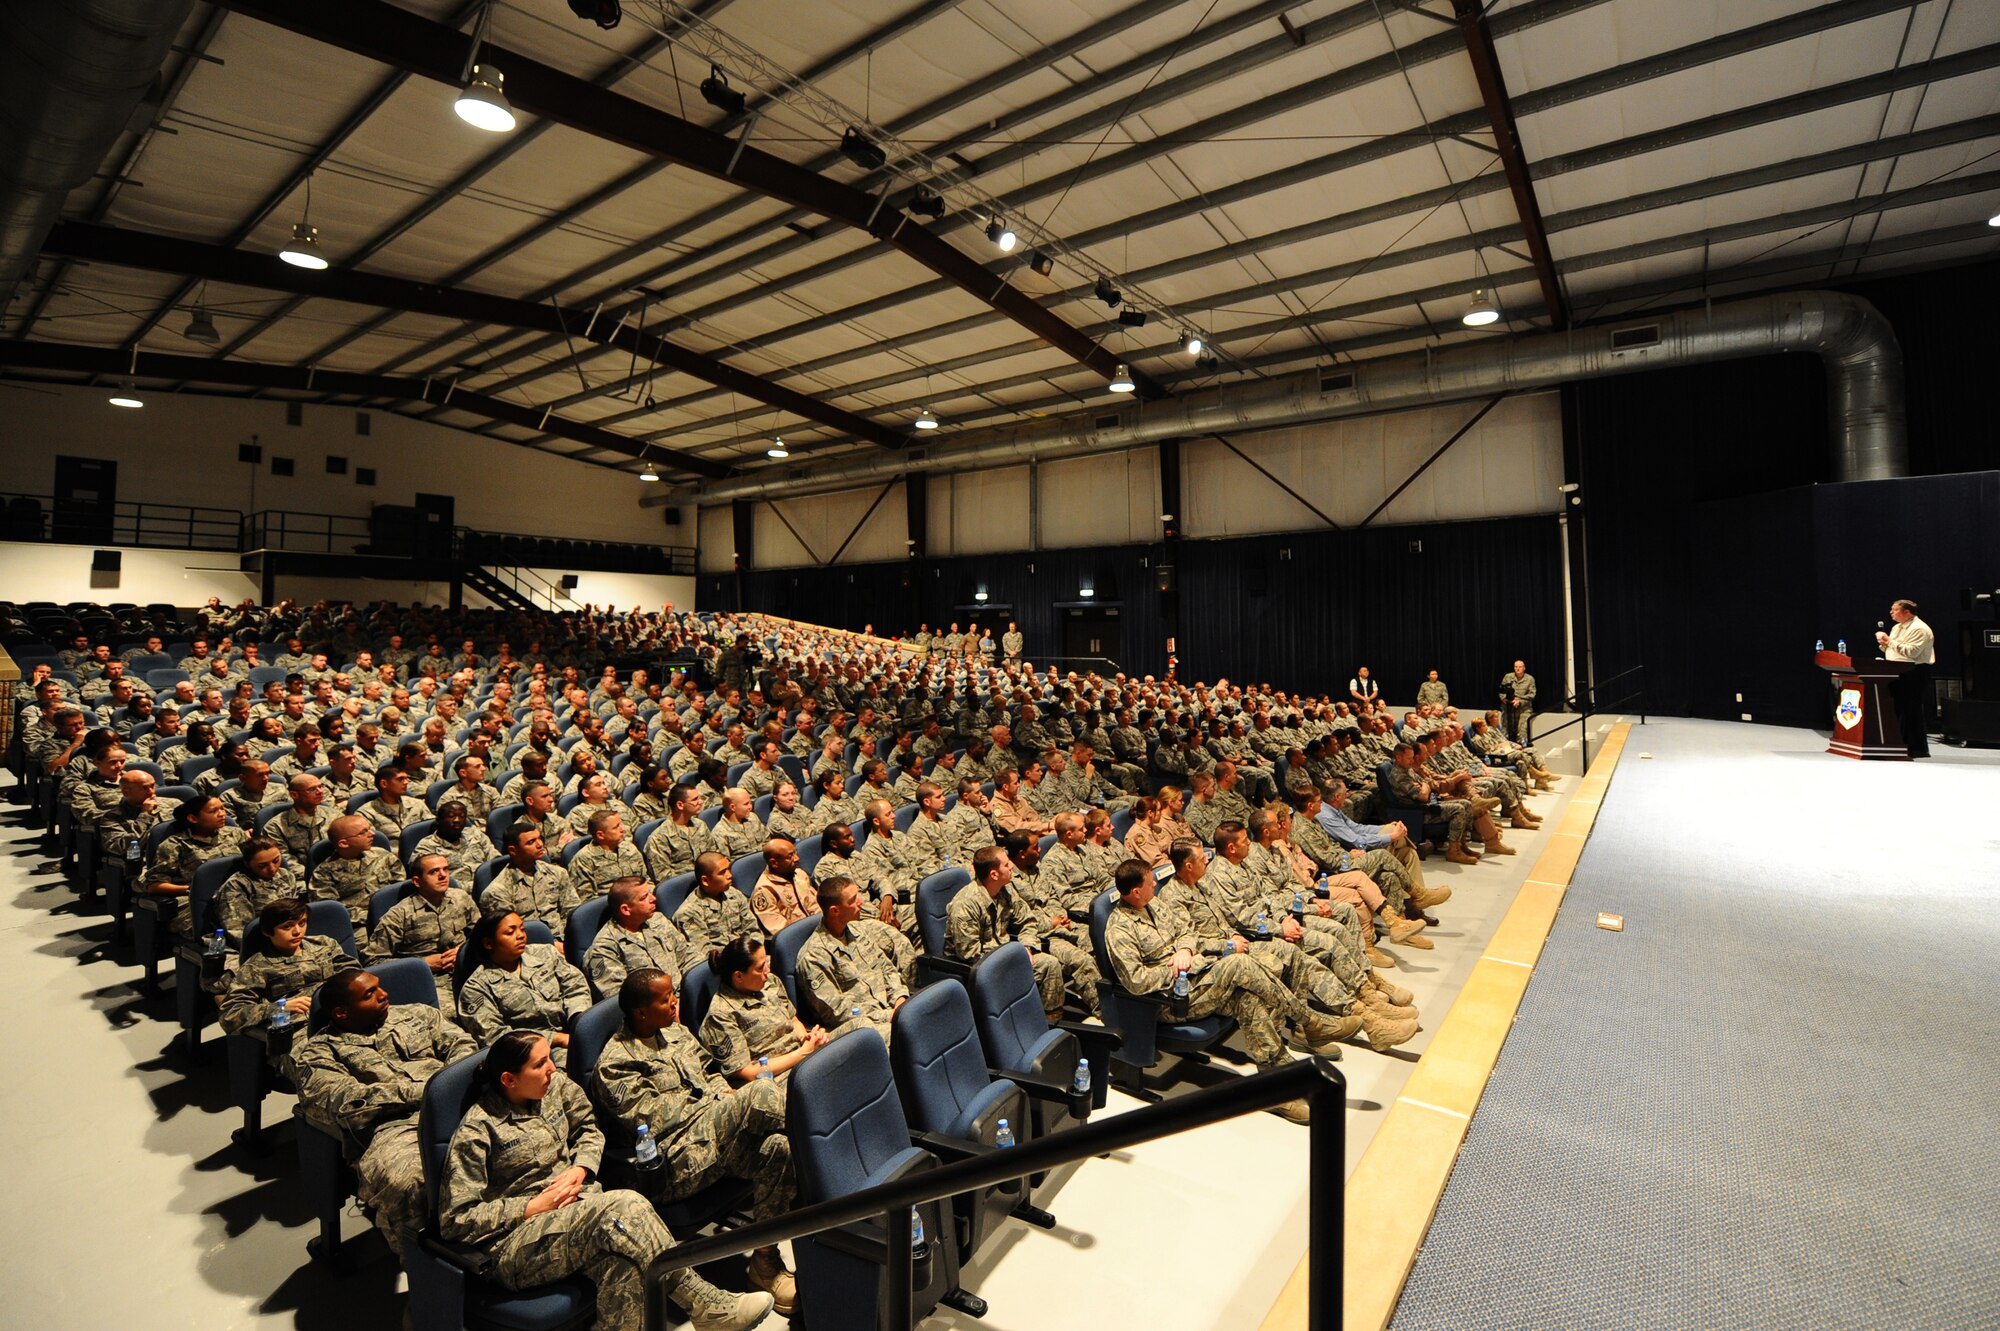 Secretary of the Air Force Michael Donley speaks to 379th Air Expeditionary Wing Airmen at the base theater during his visit to a non-disclosed Southwest Asia location Jan. 29, 2010. (U.S. Air Force photo by Senior Airman Kasey Zickmund)